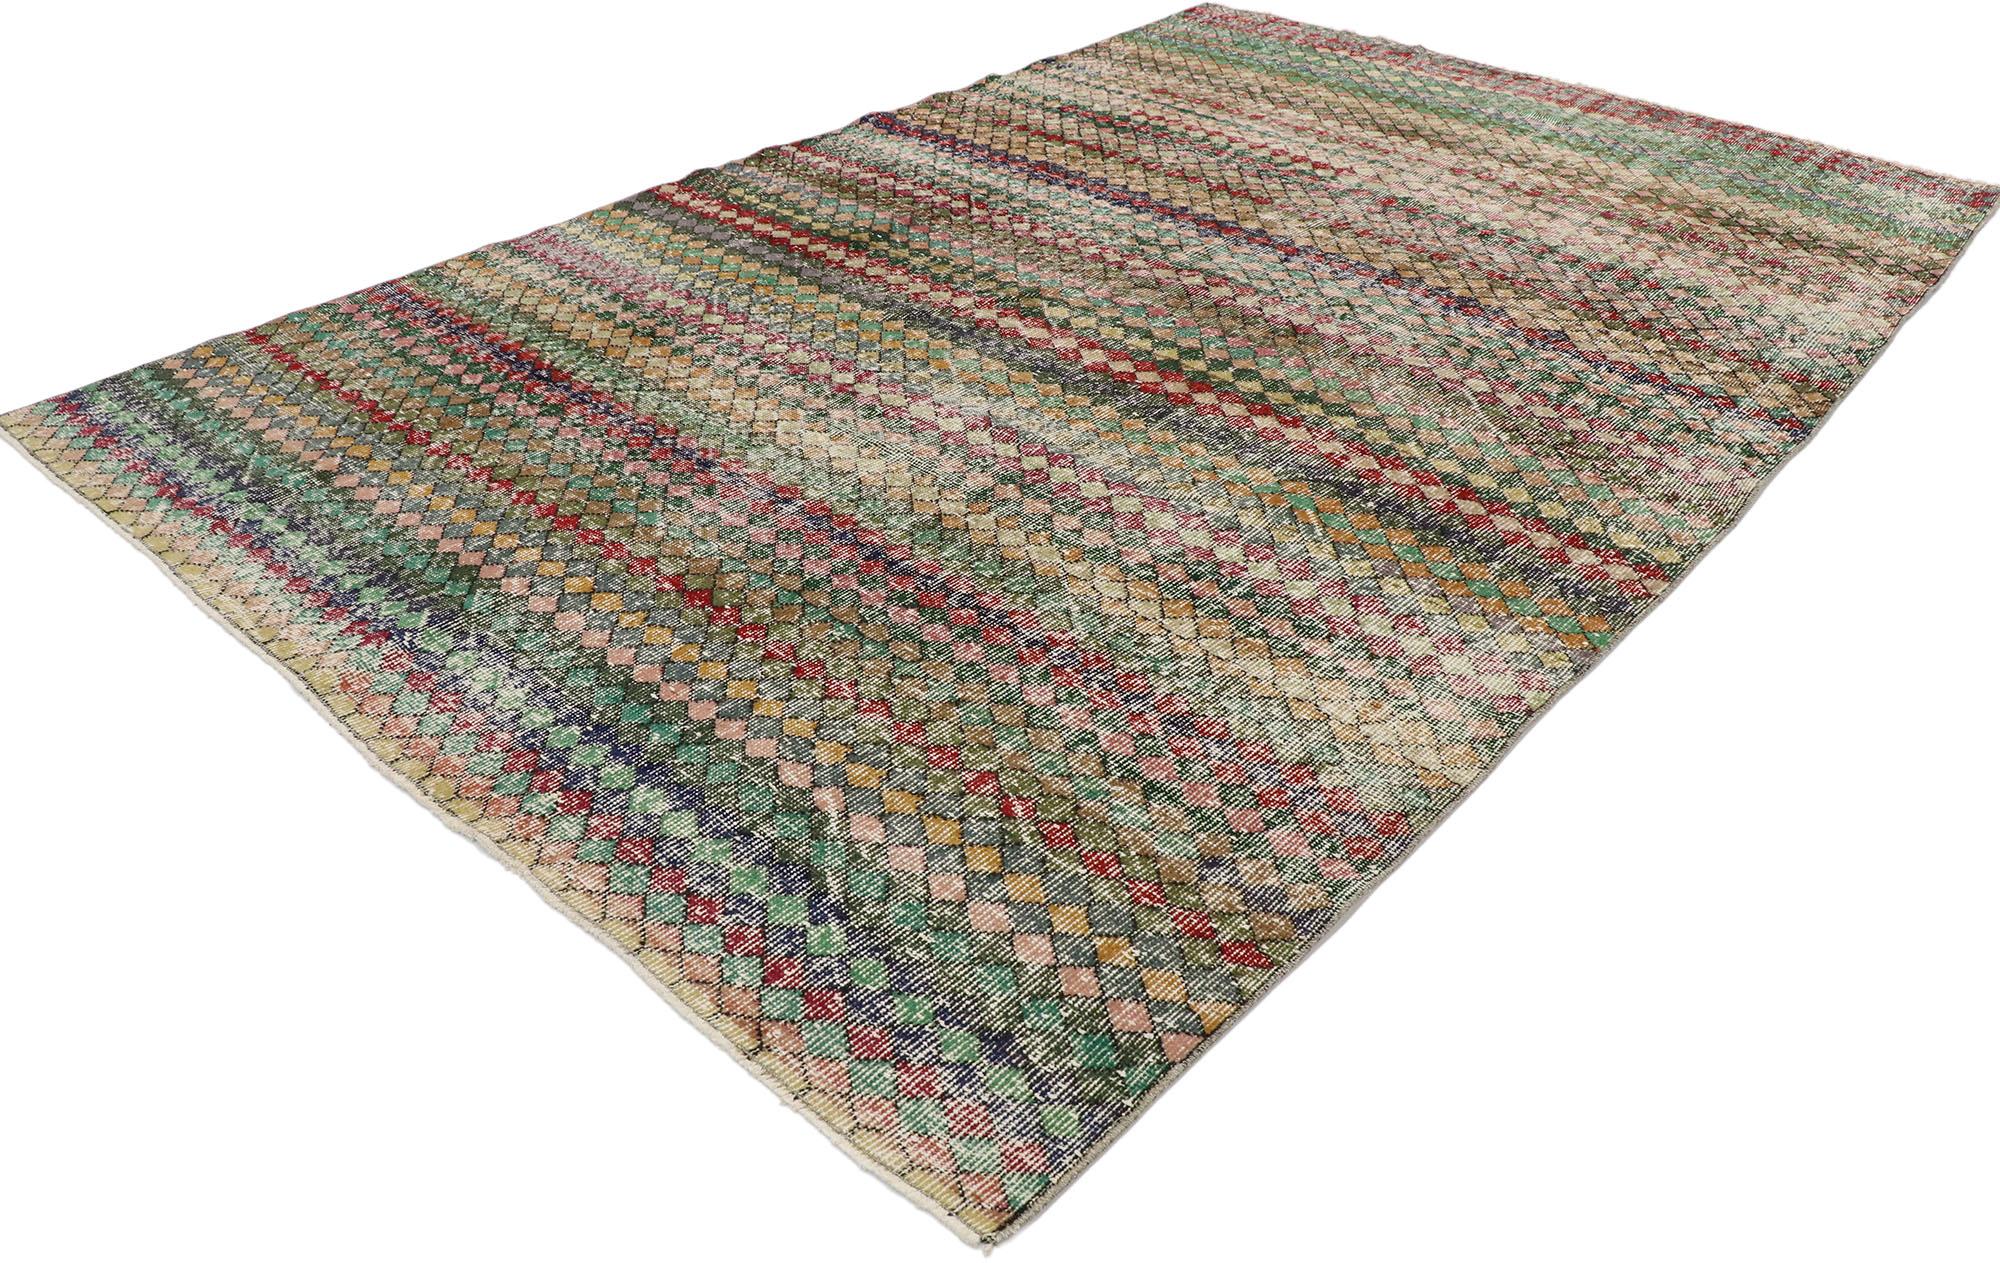 53295 distressed vintage Turkish Sivas rug with rustic Mid-Century Modern style. This hand knotted wool distressed vintage Turkish Sivas rug features an all-over checkerboard pattern comprised of small multicolored diamonds. Gentle waves of abrash